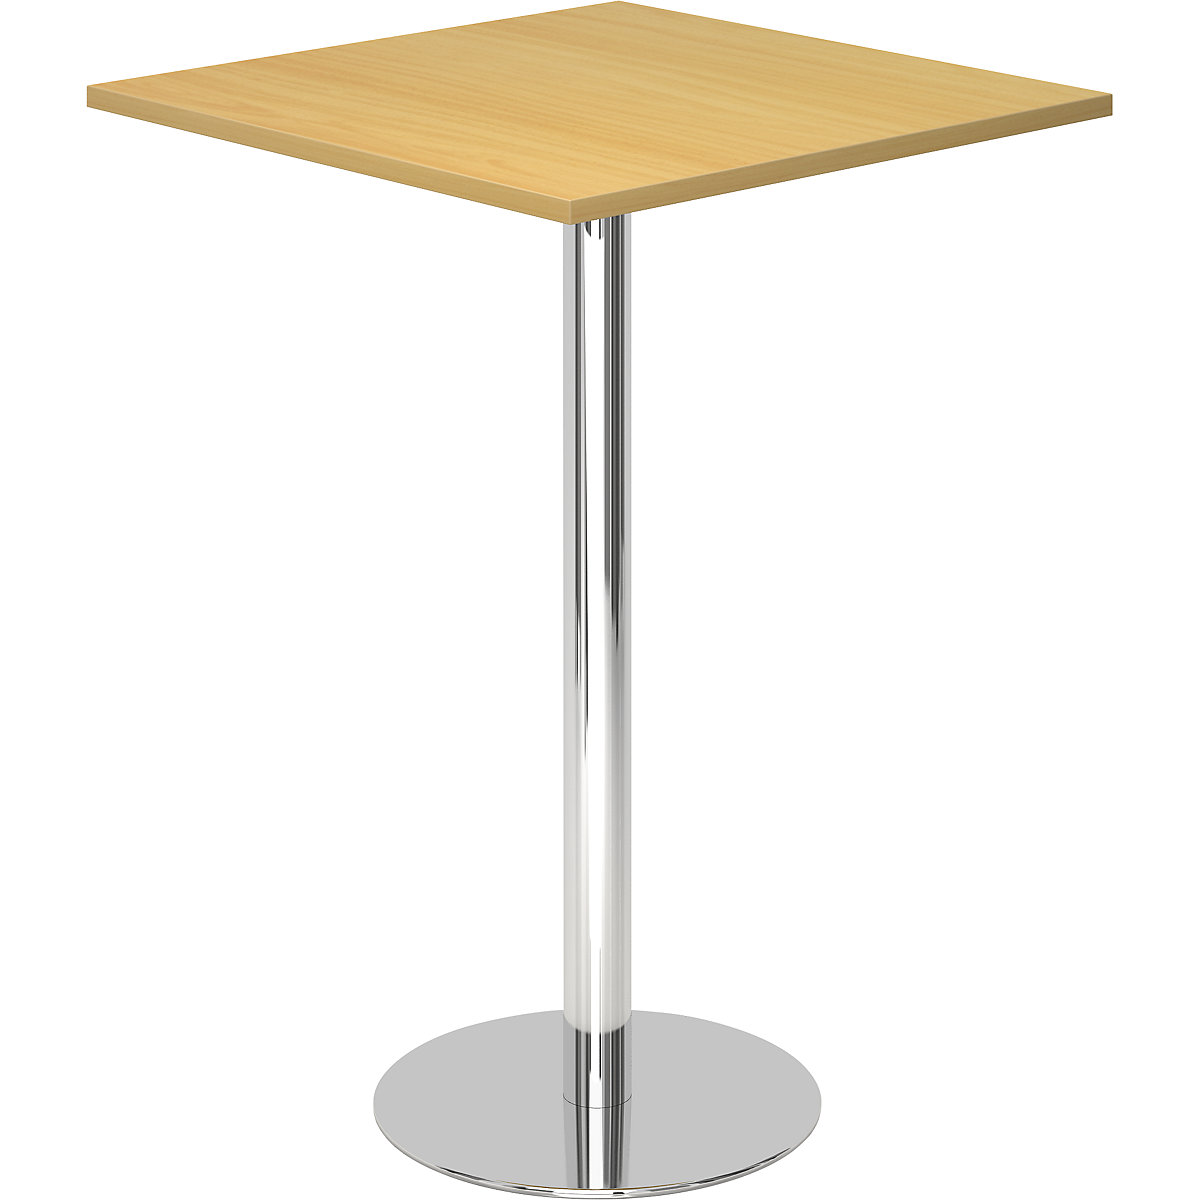 Pedestal table, LxW 800 x 800 mm, 1116 mm high, chrome plated frame, tabletop in beech finish-4